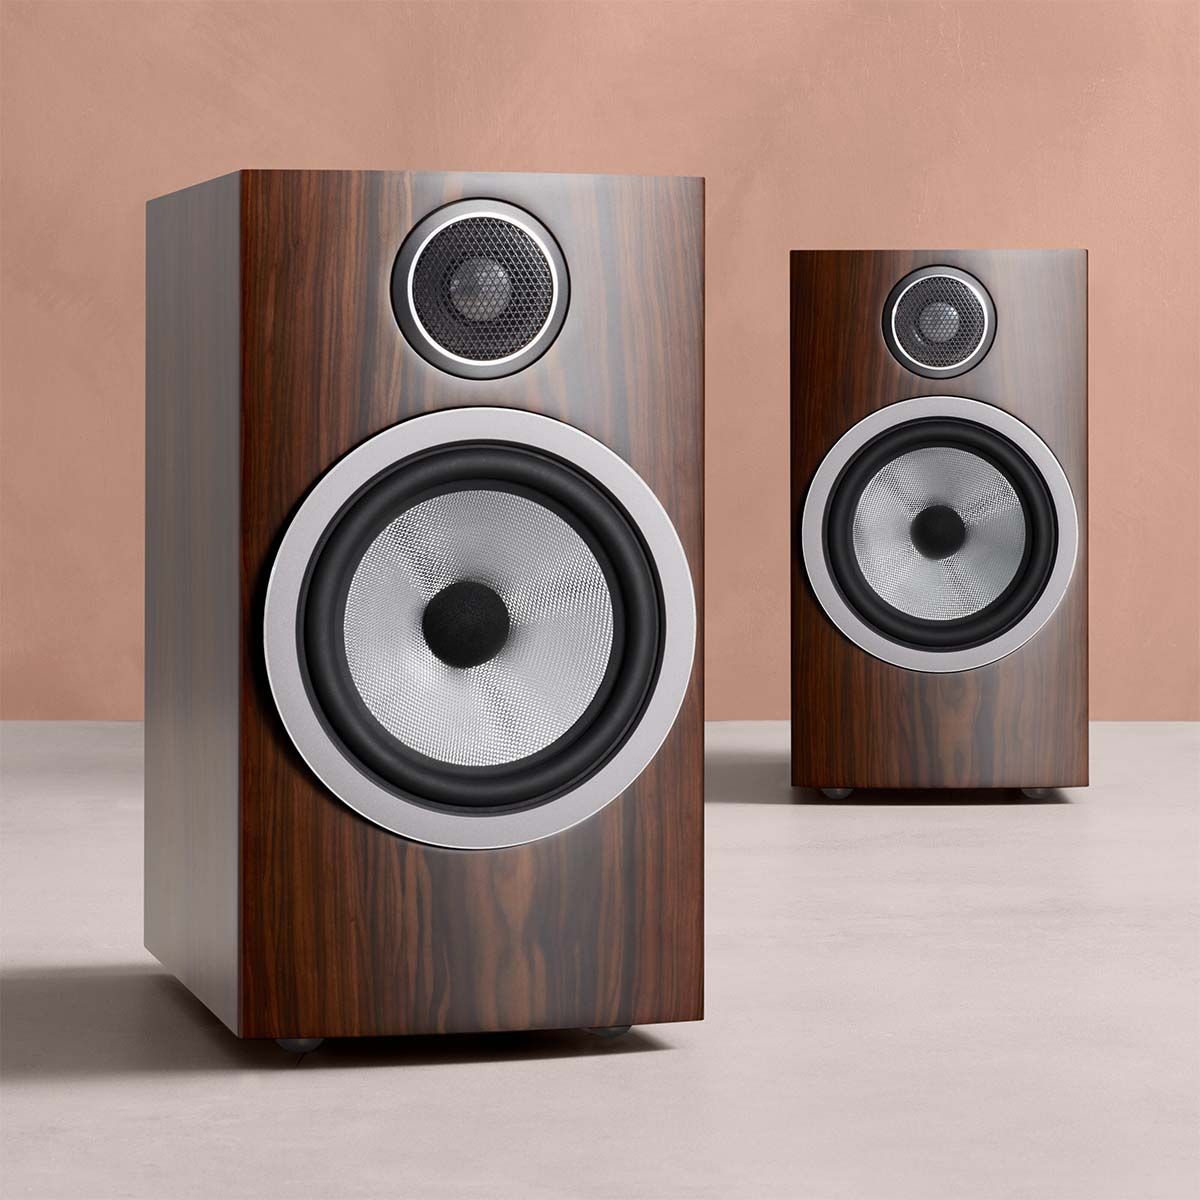 Bowers & Wilkins 706 S3 2-Way Stand Mount Bookshelf Loudspeakers in mocha on table with orange background